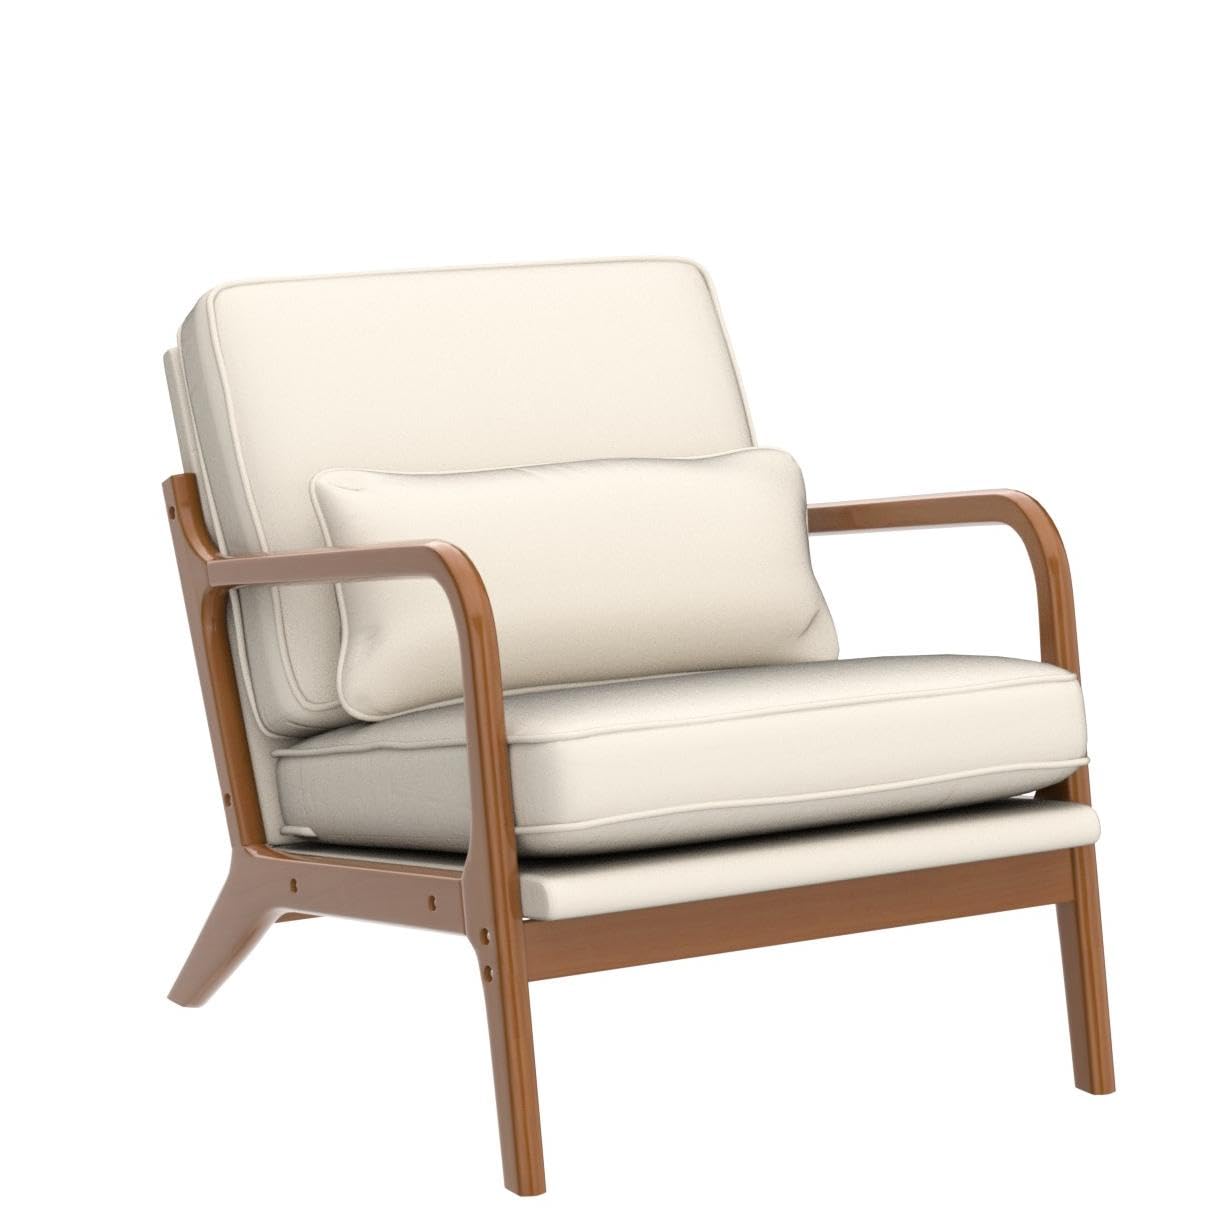 Karl home Accent Chair Mid-Century Modern Chair with Pillow Upholstered Lounge Arm Chair with Solid Wood Frame & Soft Cushion for Living Room, Bedroom, Belcony, Beige